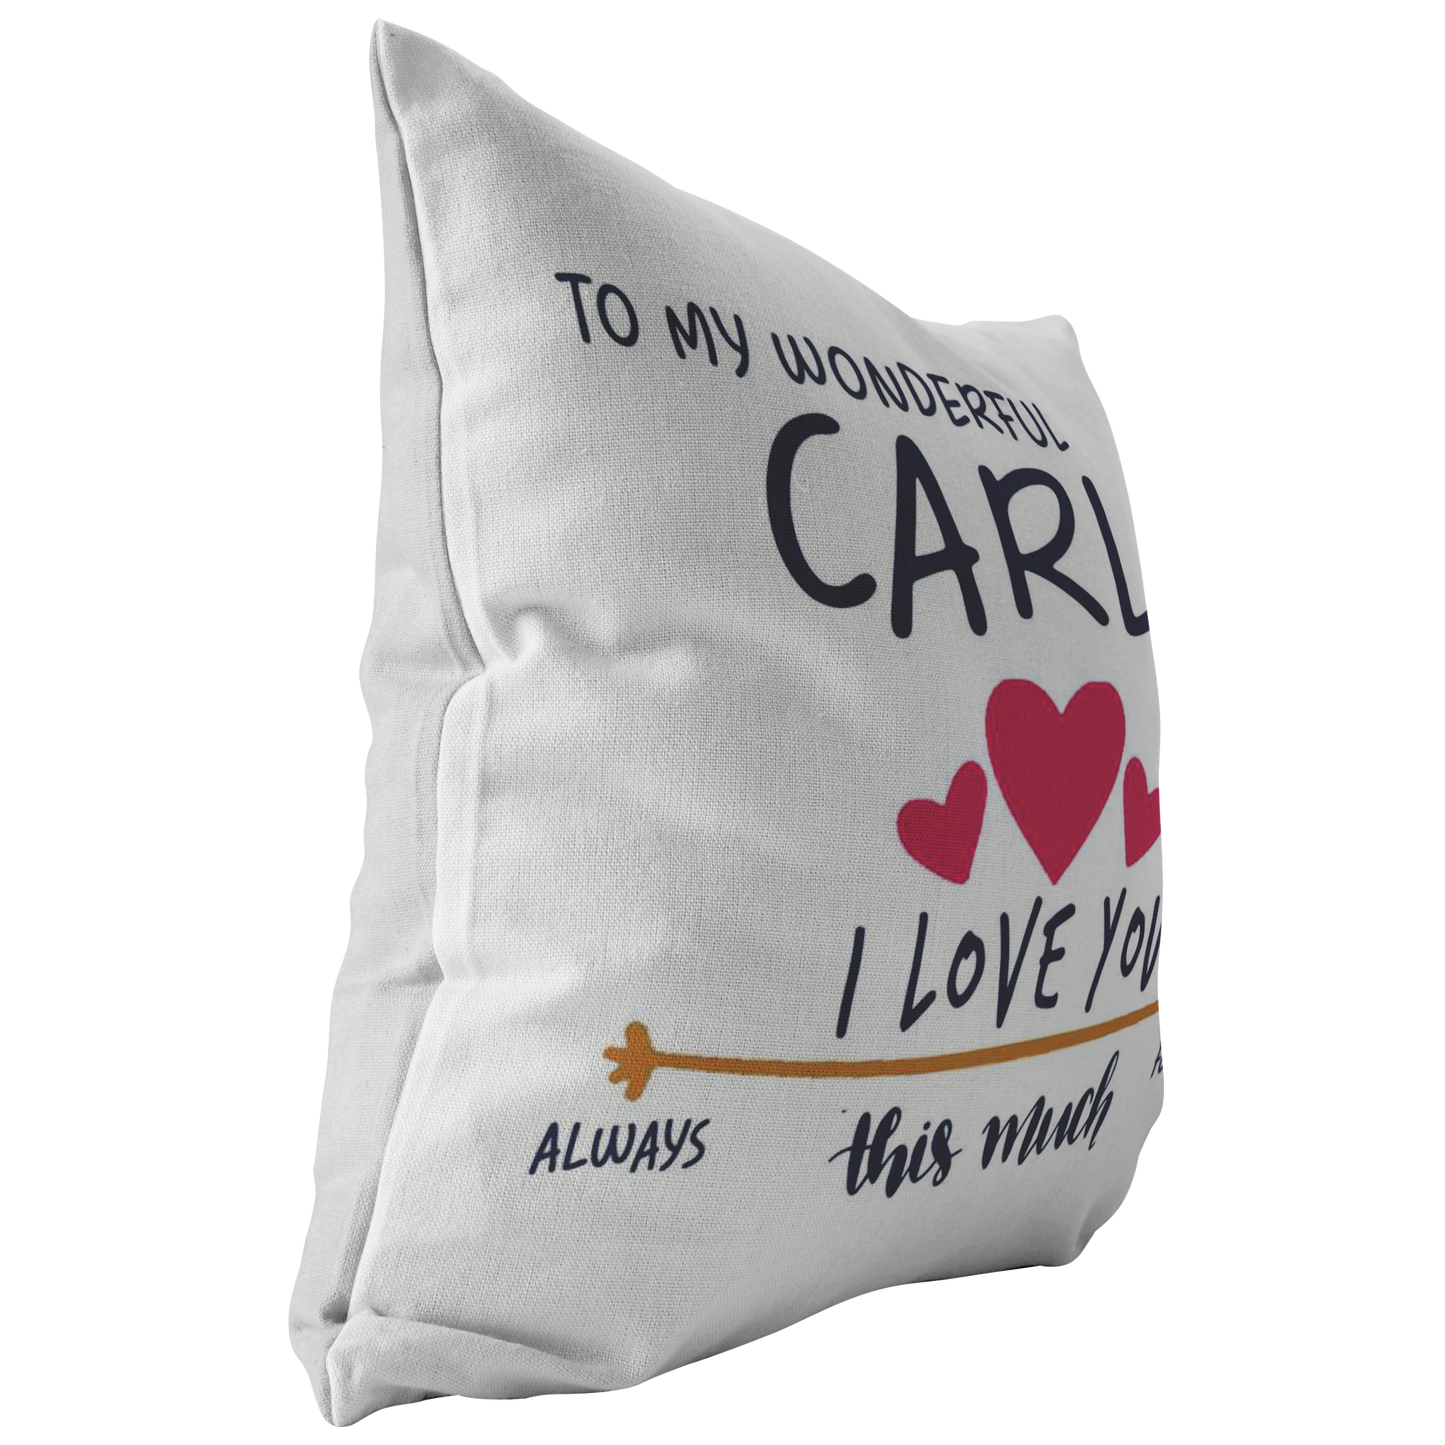 PL-21251830-sp-30423 - [ Carli | 1 | 1 ] (PI_ThrowPillowCovers) Valentines Day Pillow Covers 18x18 - to My Wonderful Carli I